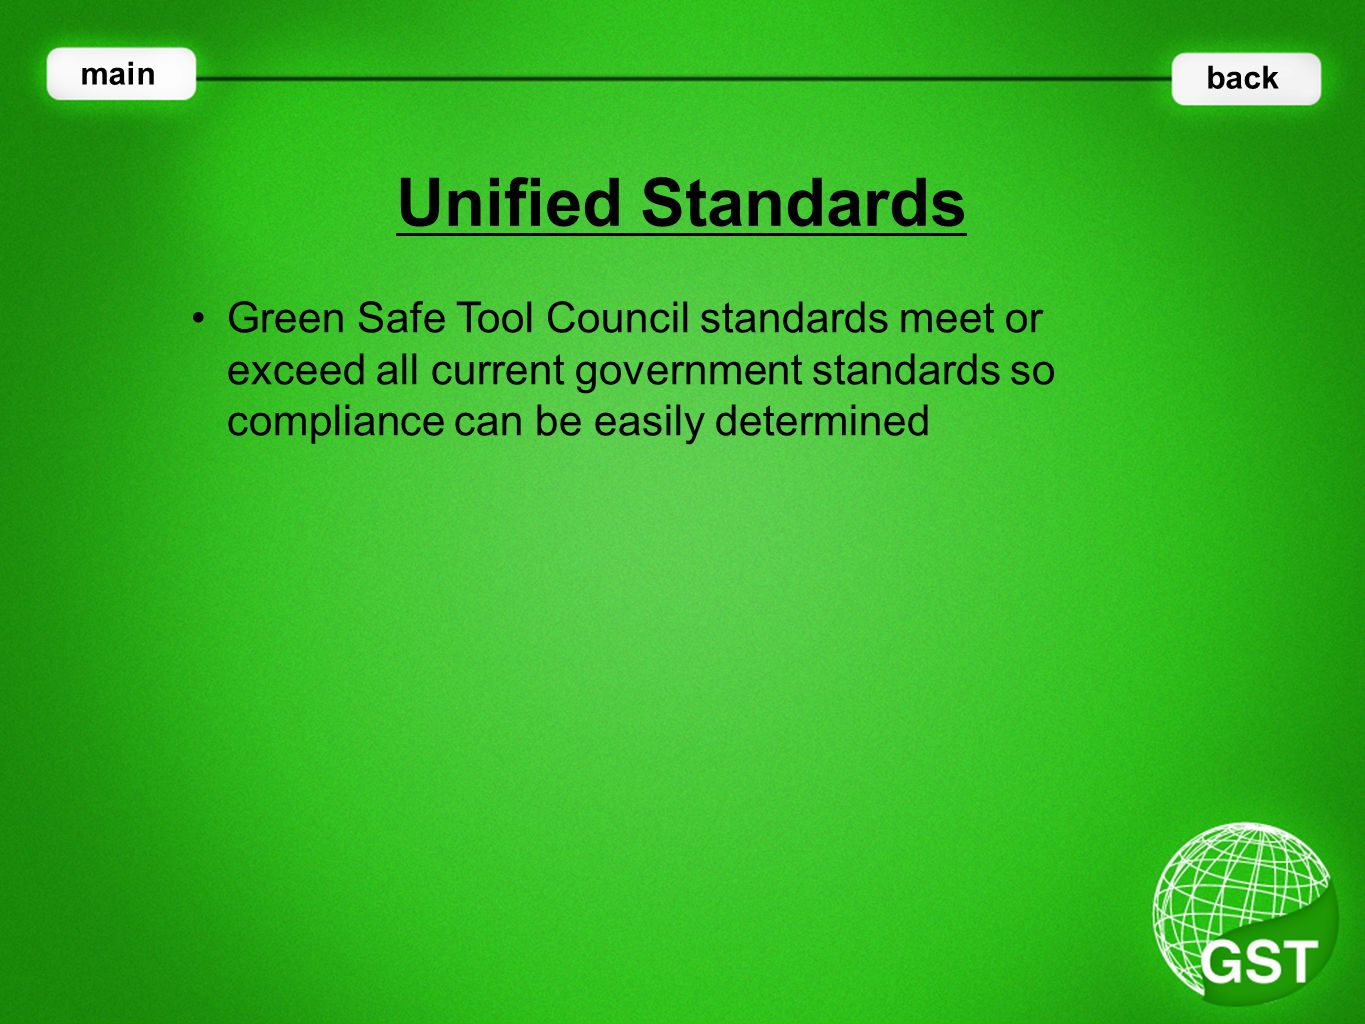 Green Safe Tool Council standards meet or exceed all current government standards so compliance can be easily determined Unified Standards main back